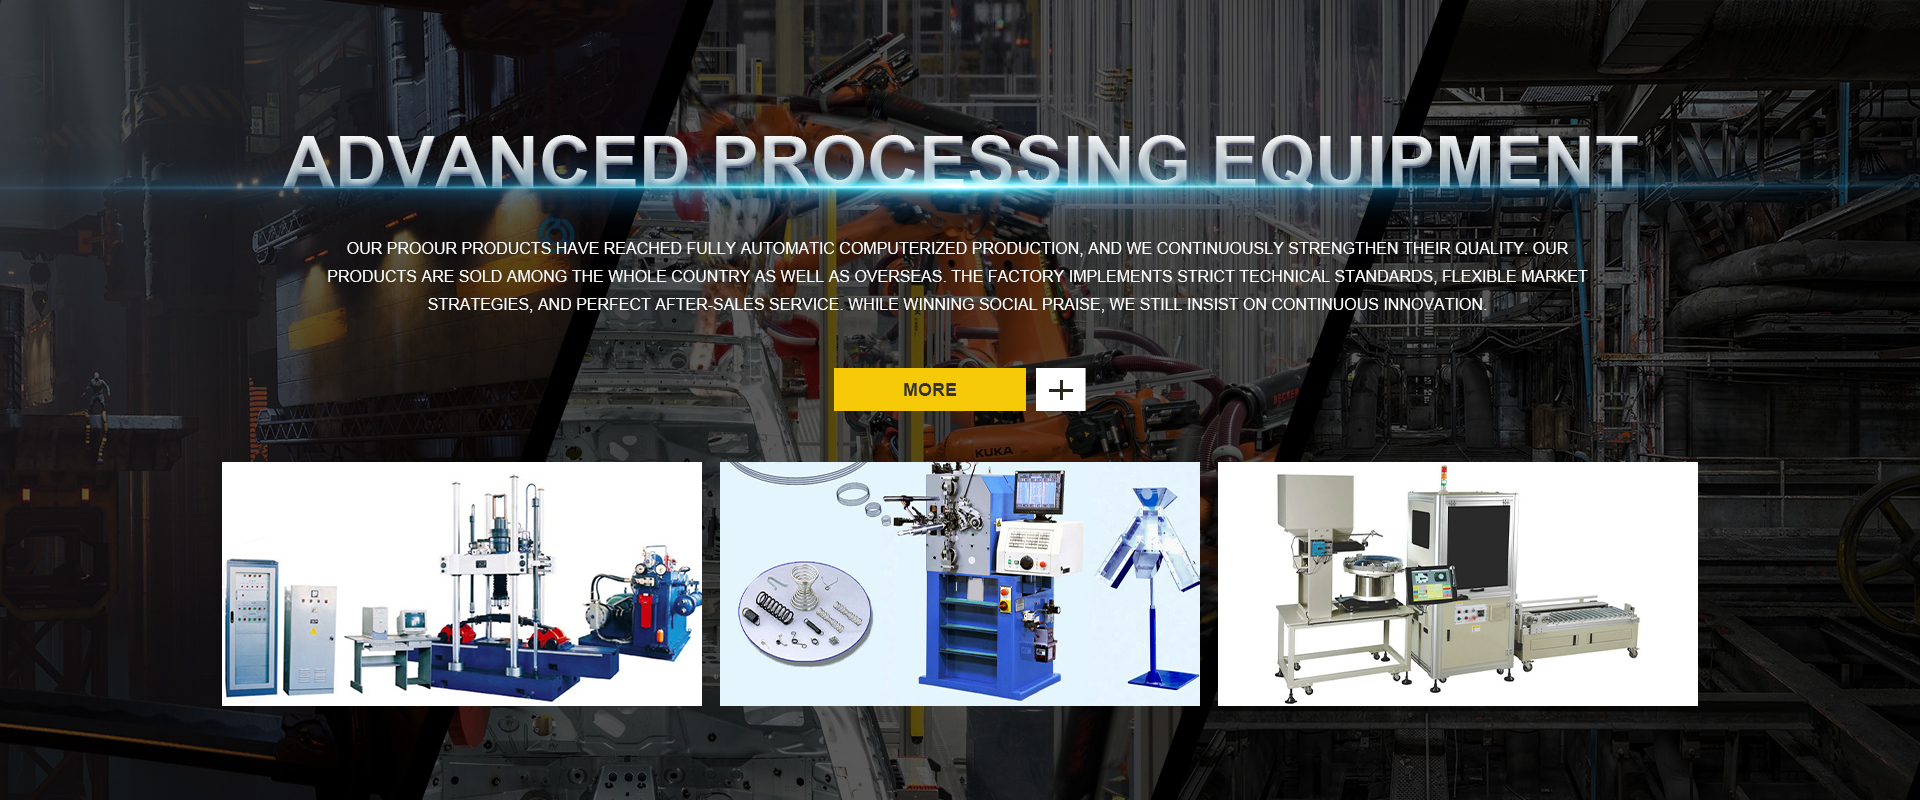 Advanced Processing Equipment for Spring Production